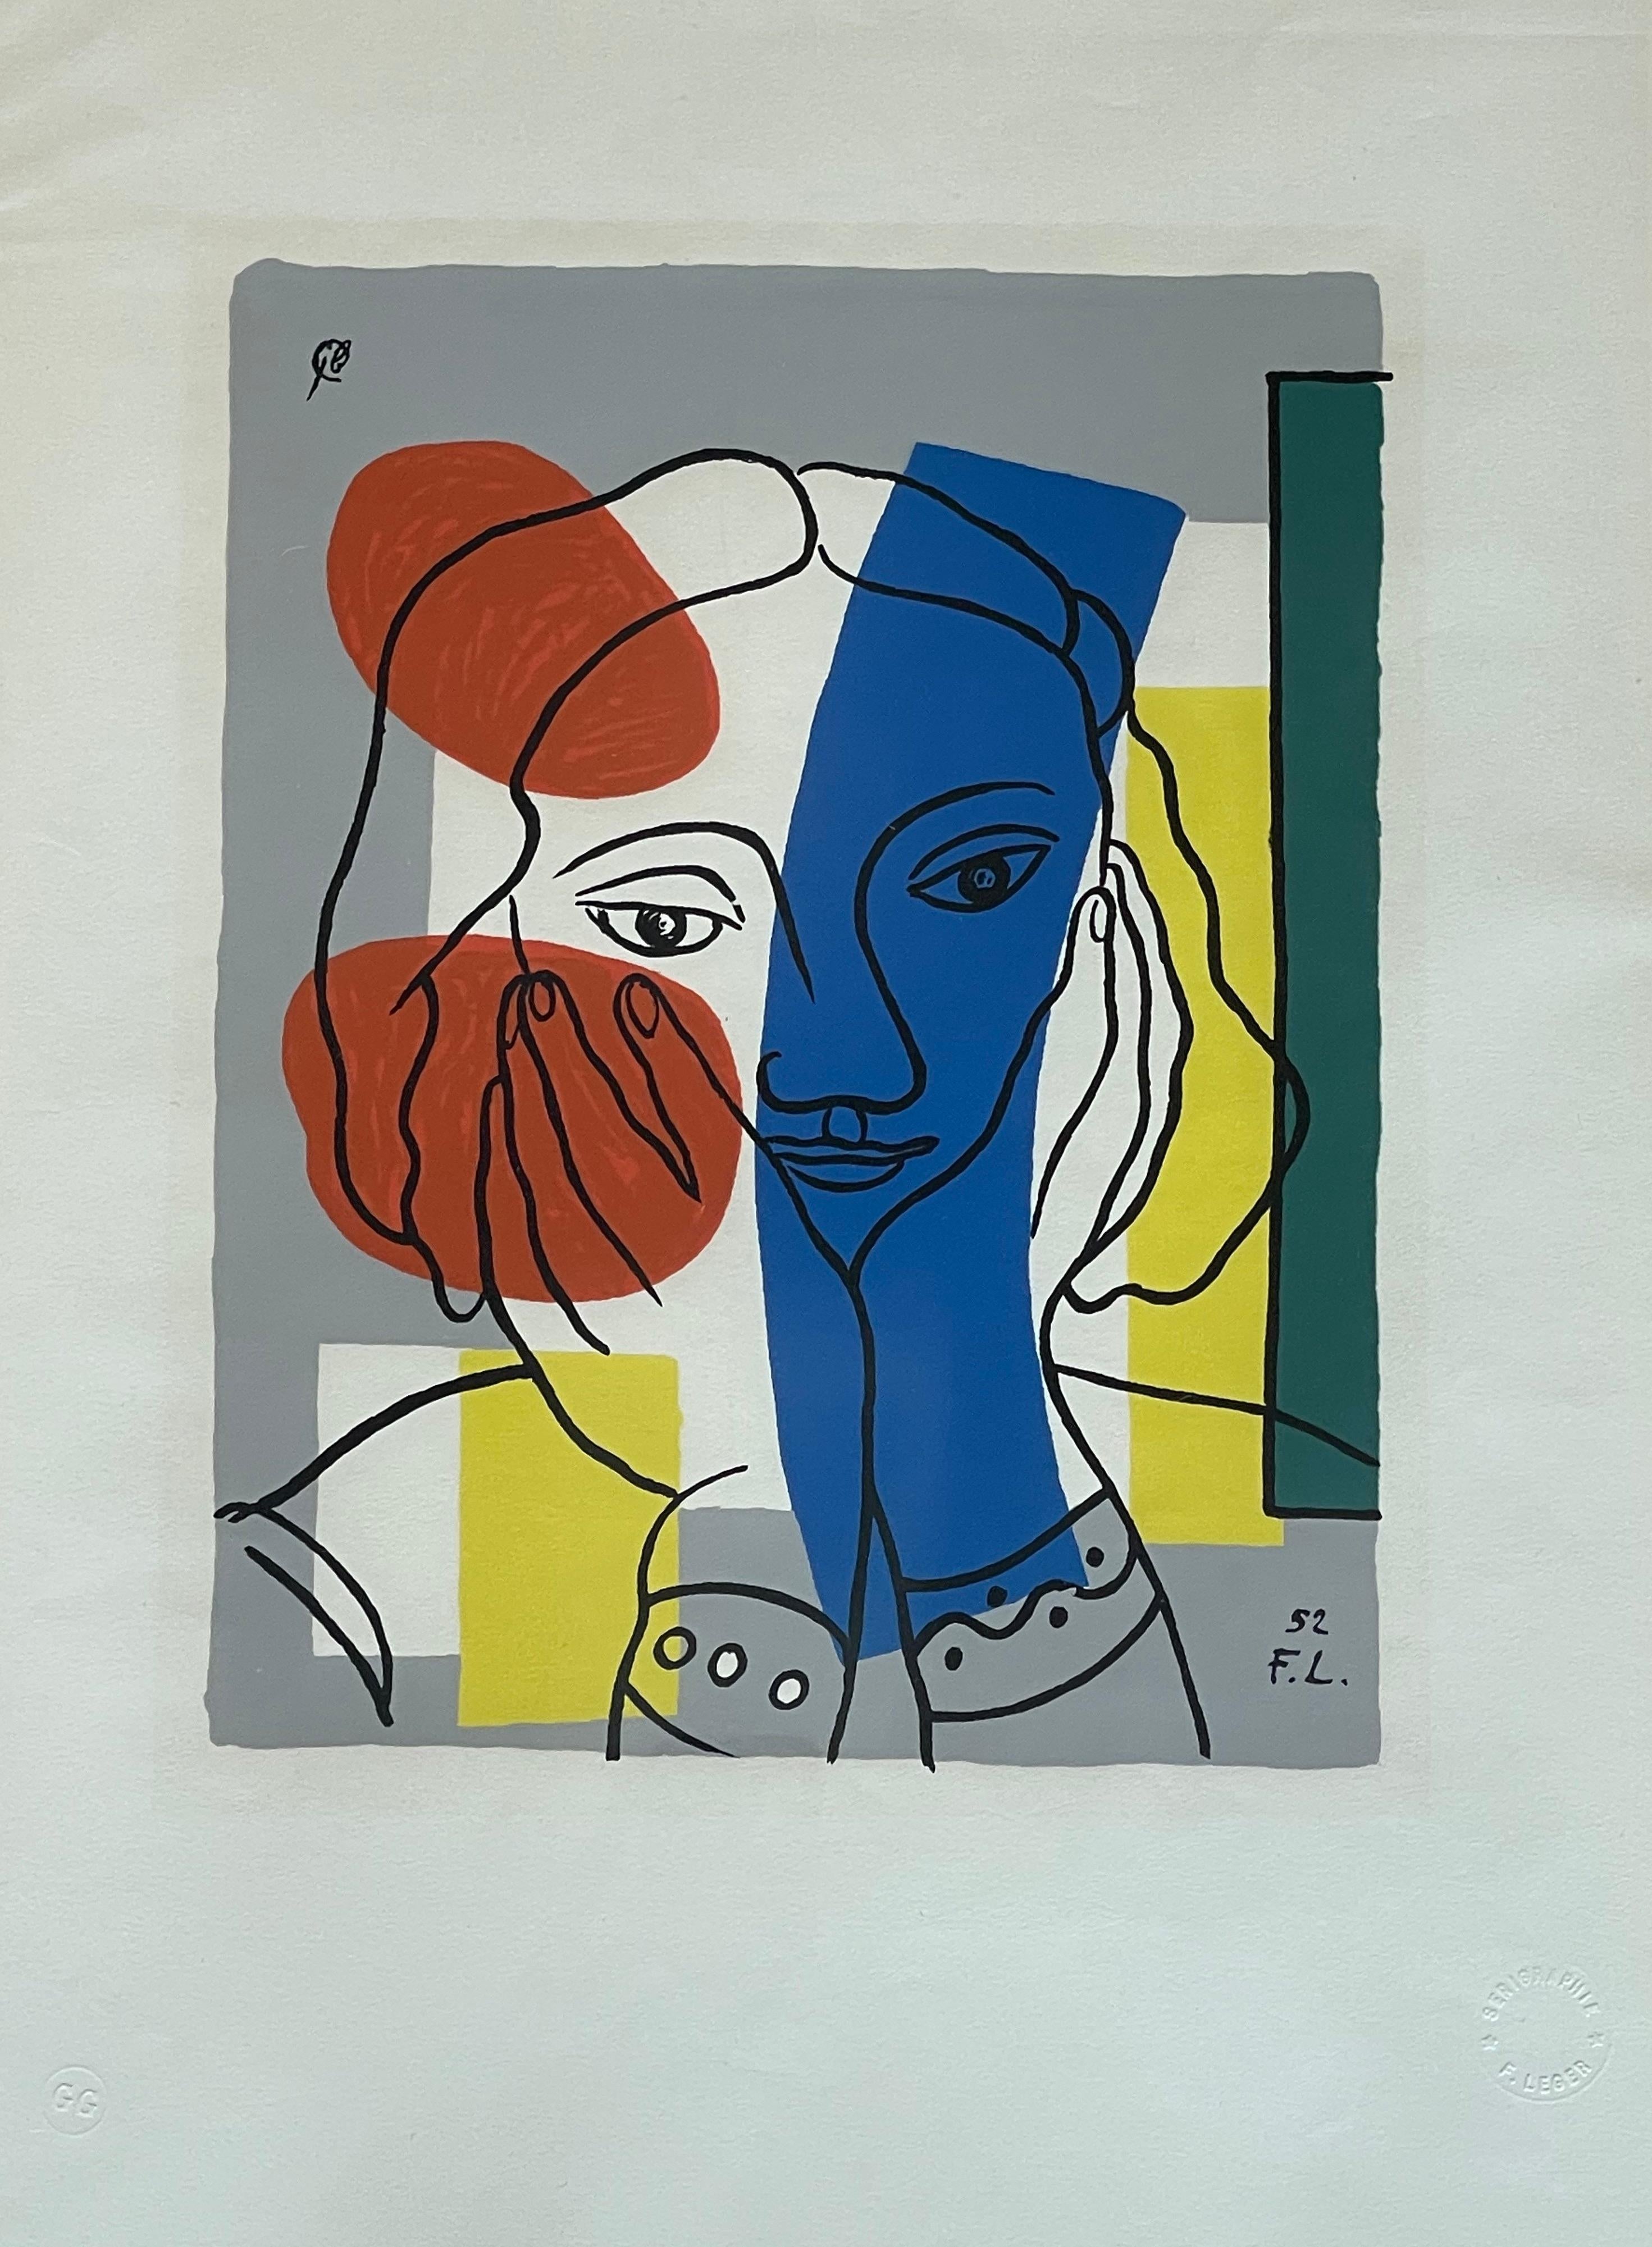 Original painting by renowned cubist and pop art painter, Fernard Léger
Authenticated, signed, and stamped 
Sourced from Paris by Martyn Lawrence Bullard